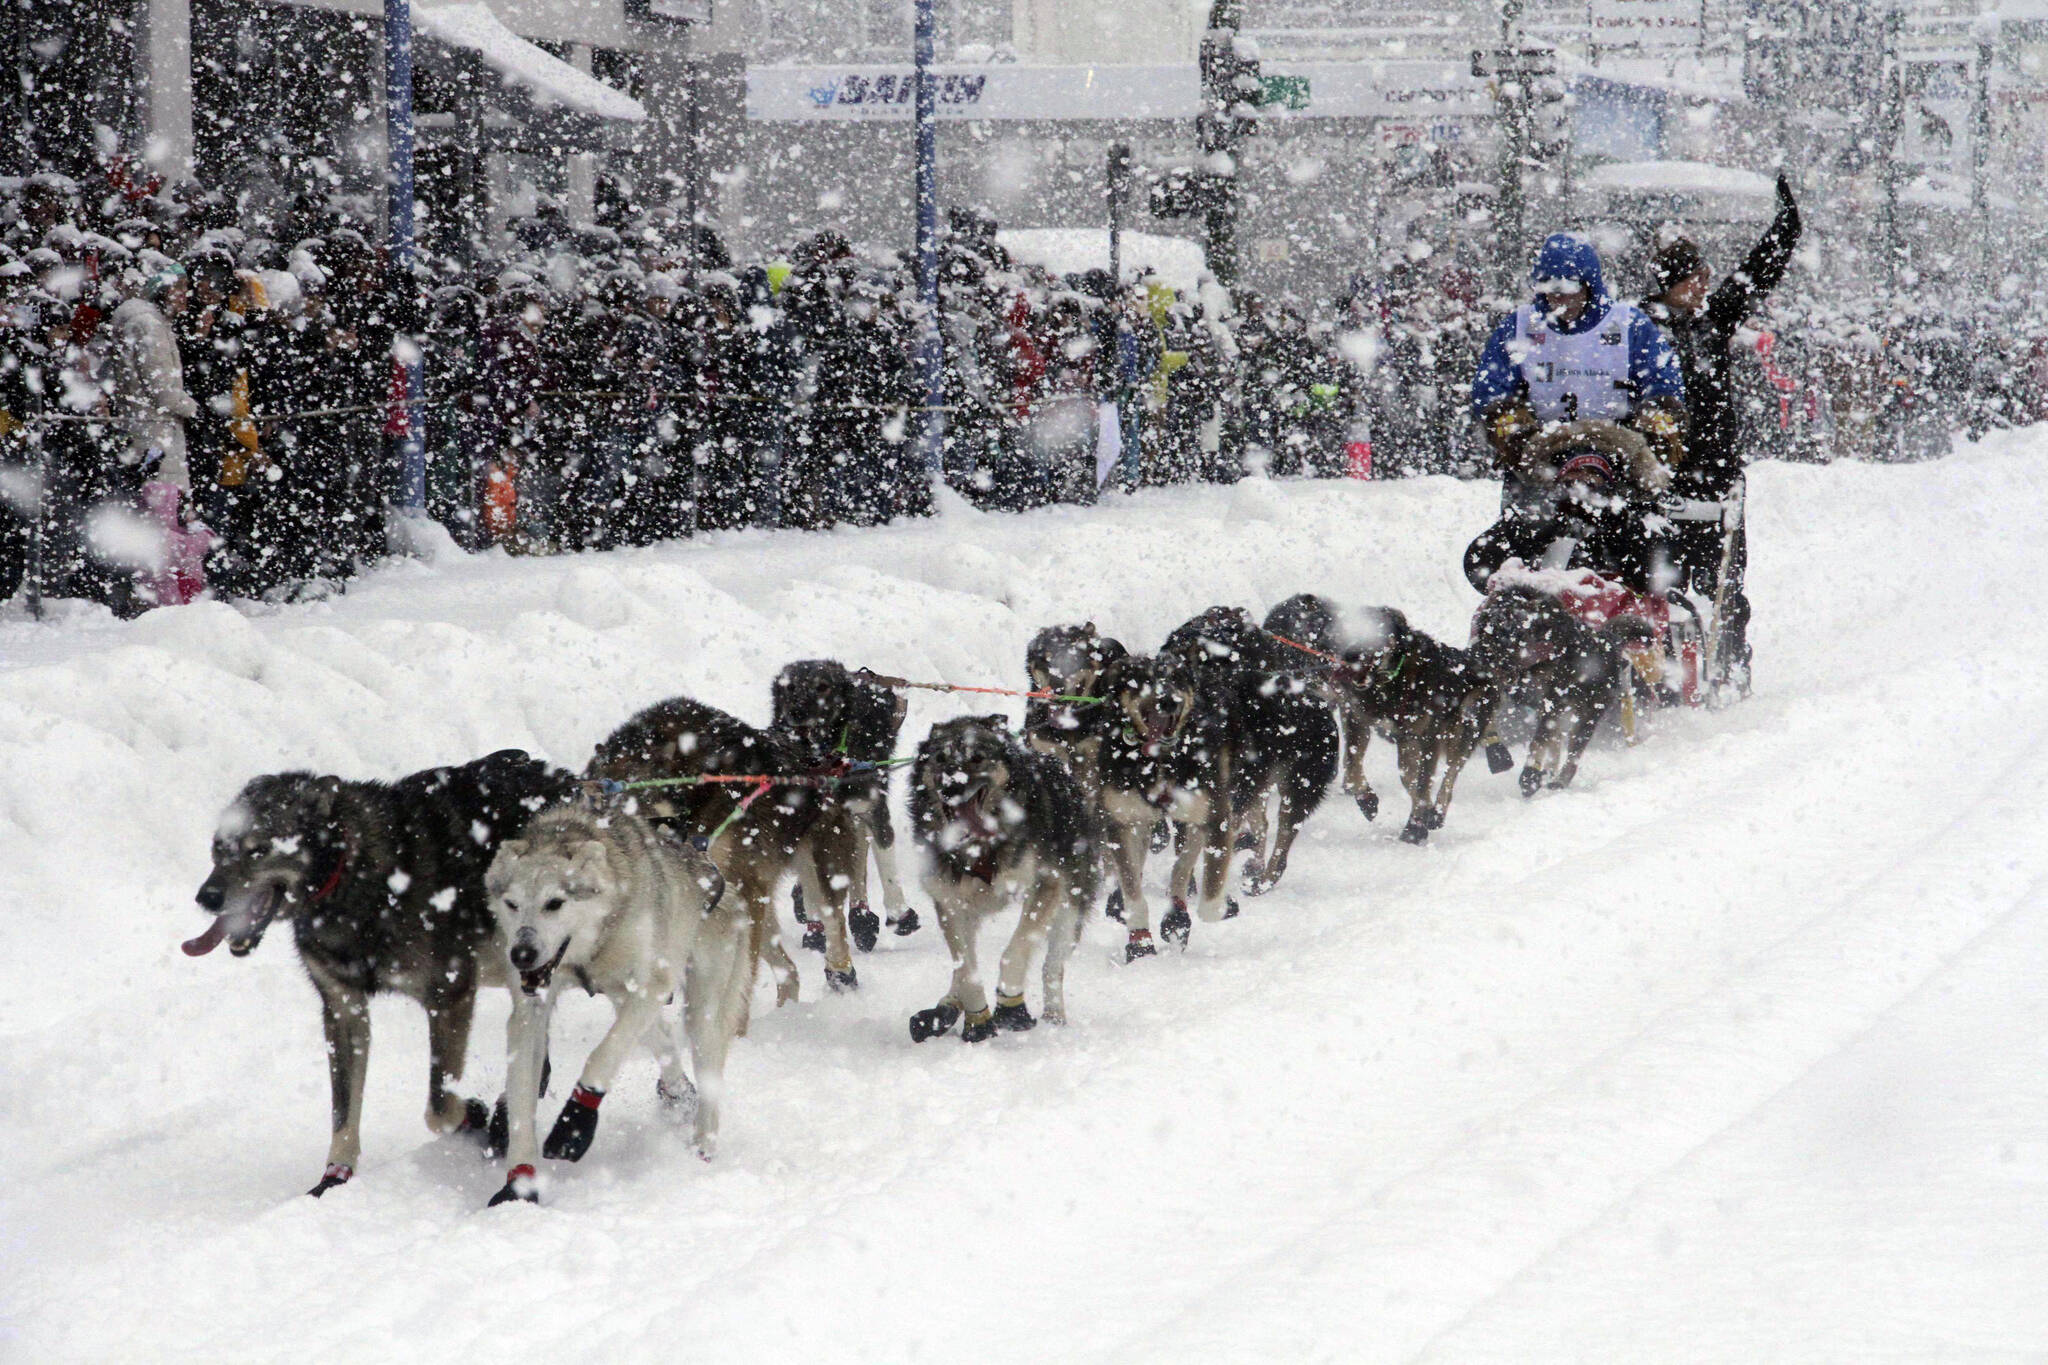 Jeff King takes his sled dog team through a snowstorm in downtown Anchorage, Alaska, March 4, 2022, during the ceremonial start of the Iditarod Trail Sled Dog Race. Only 33 mushers will participate in the ceremonial start of the Iditarod on Saturady, March 4, the smallest field ever. (AP Photo / Mark Thiessen)